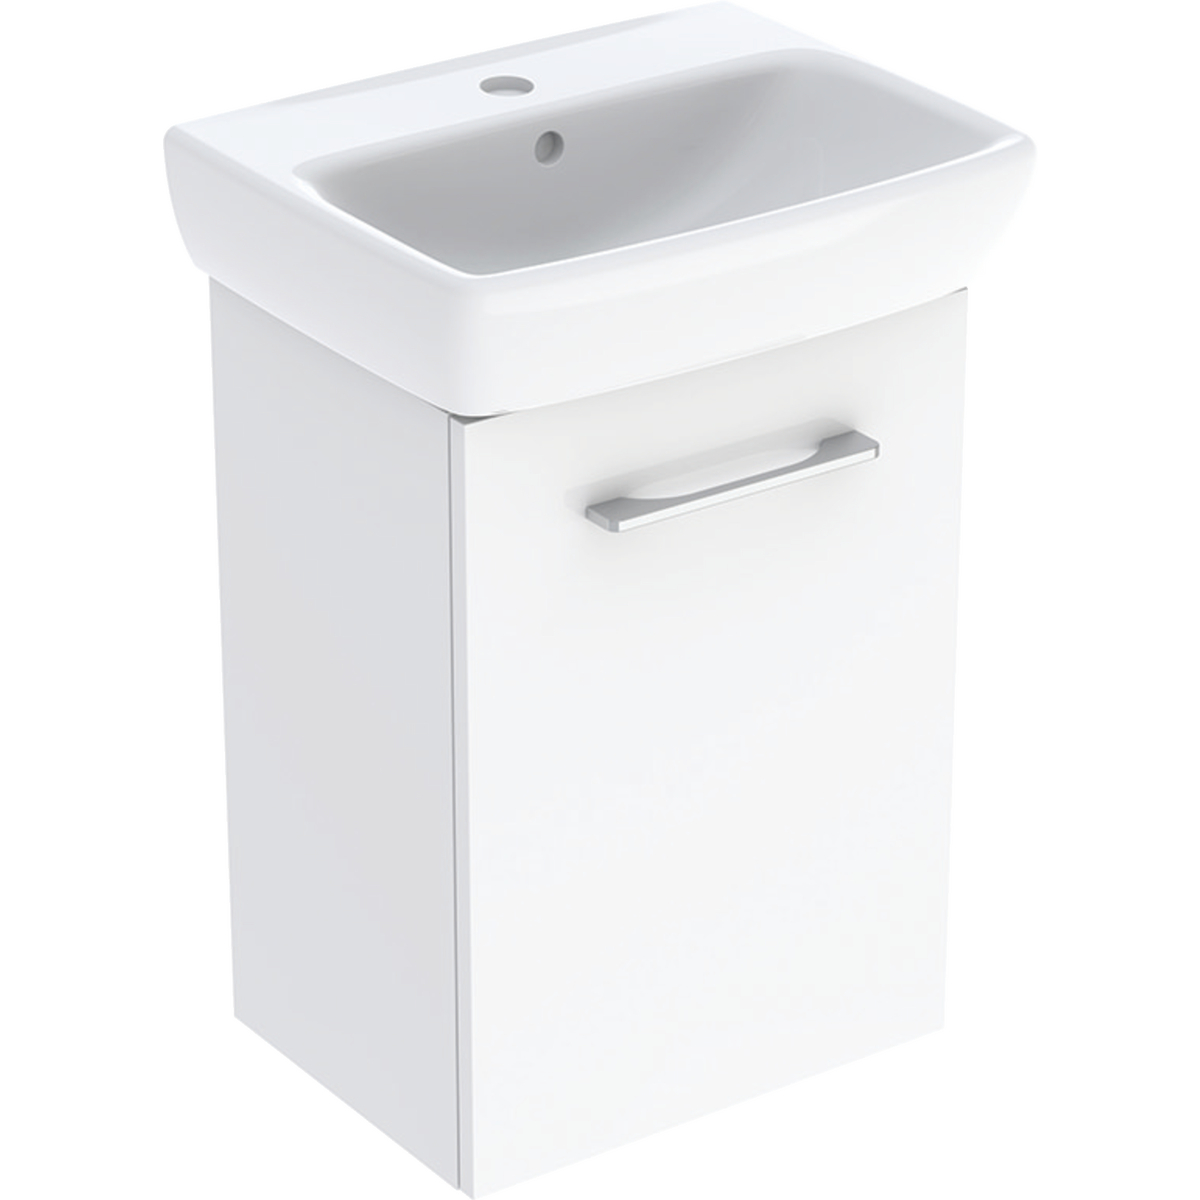 Selnova Square Basins With Cabinet, One Door 450mm - White